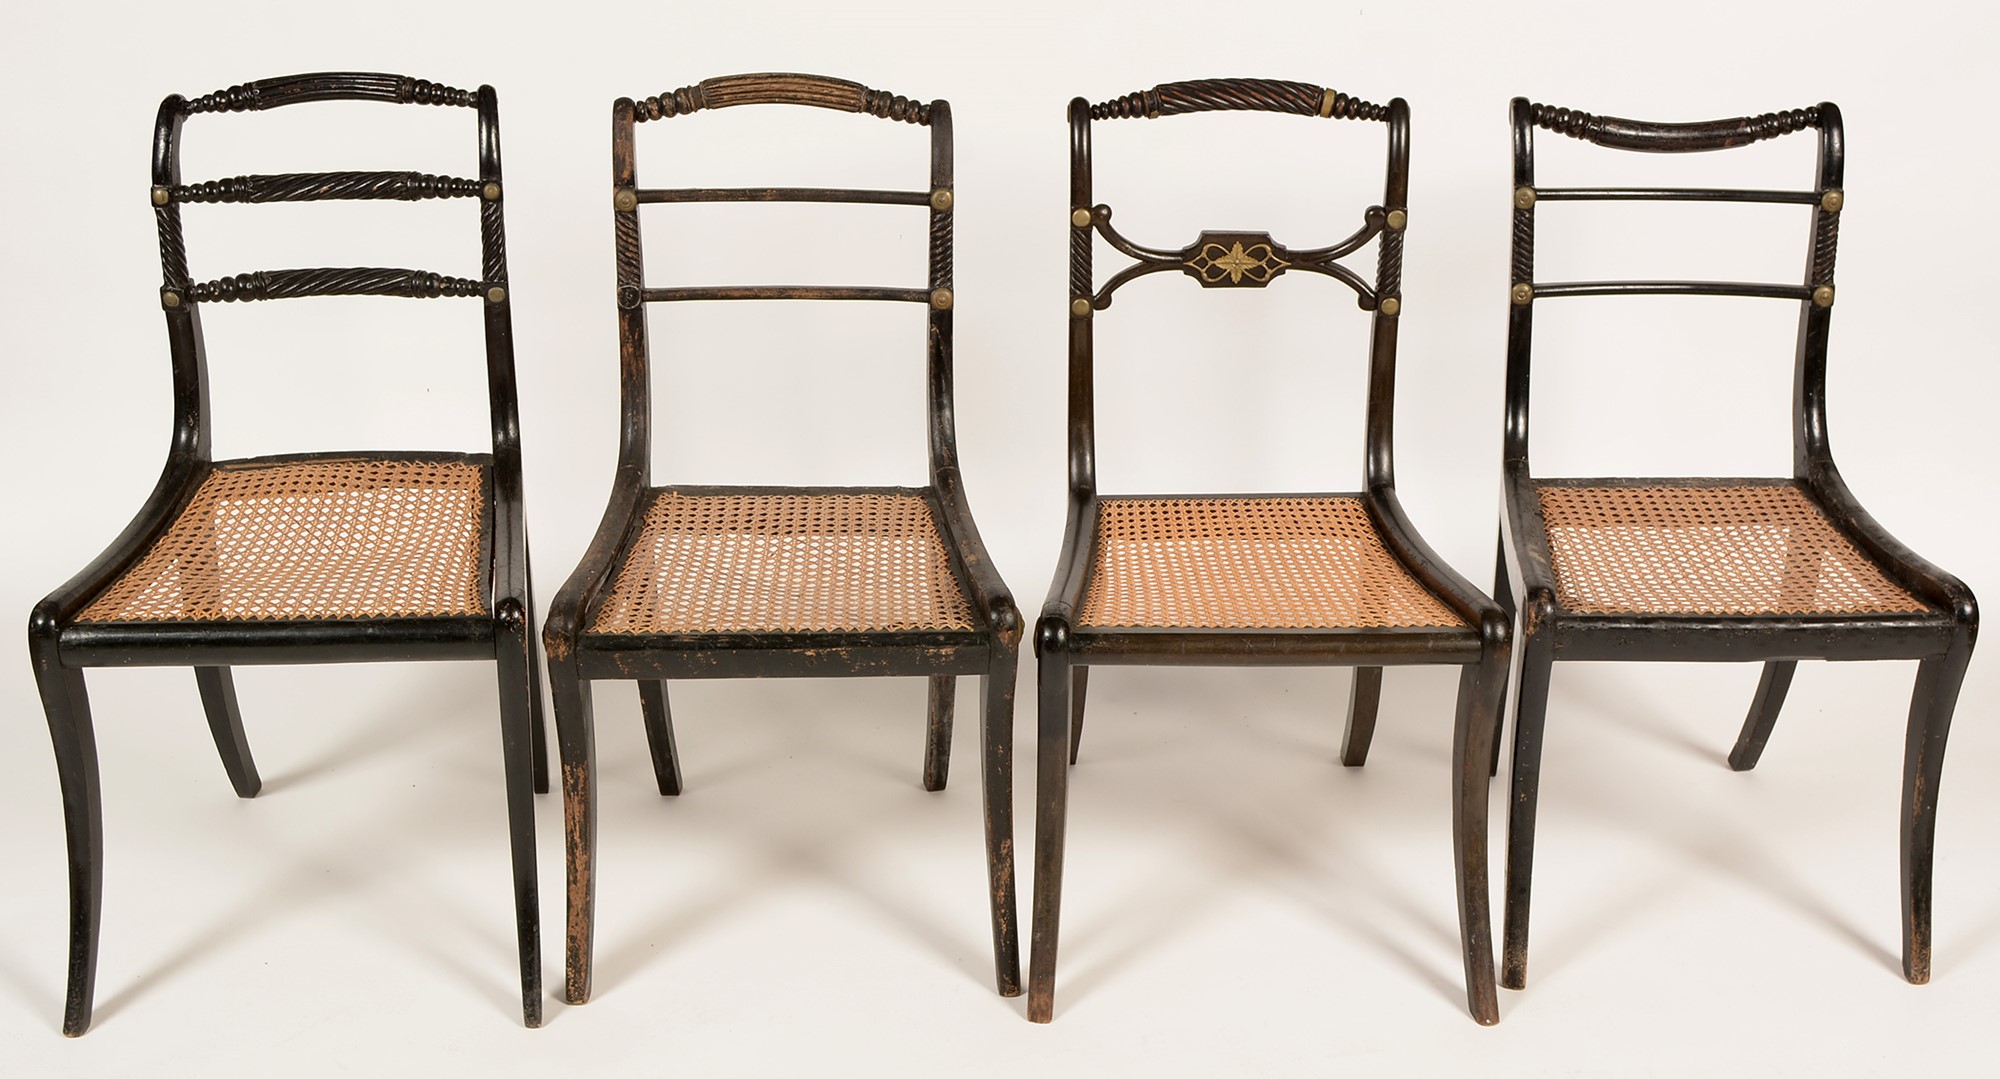 Eleven Regency and later dining chairs - Image 7 of 7